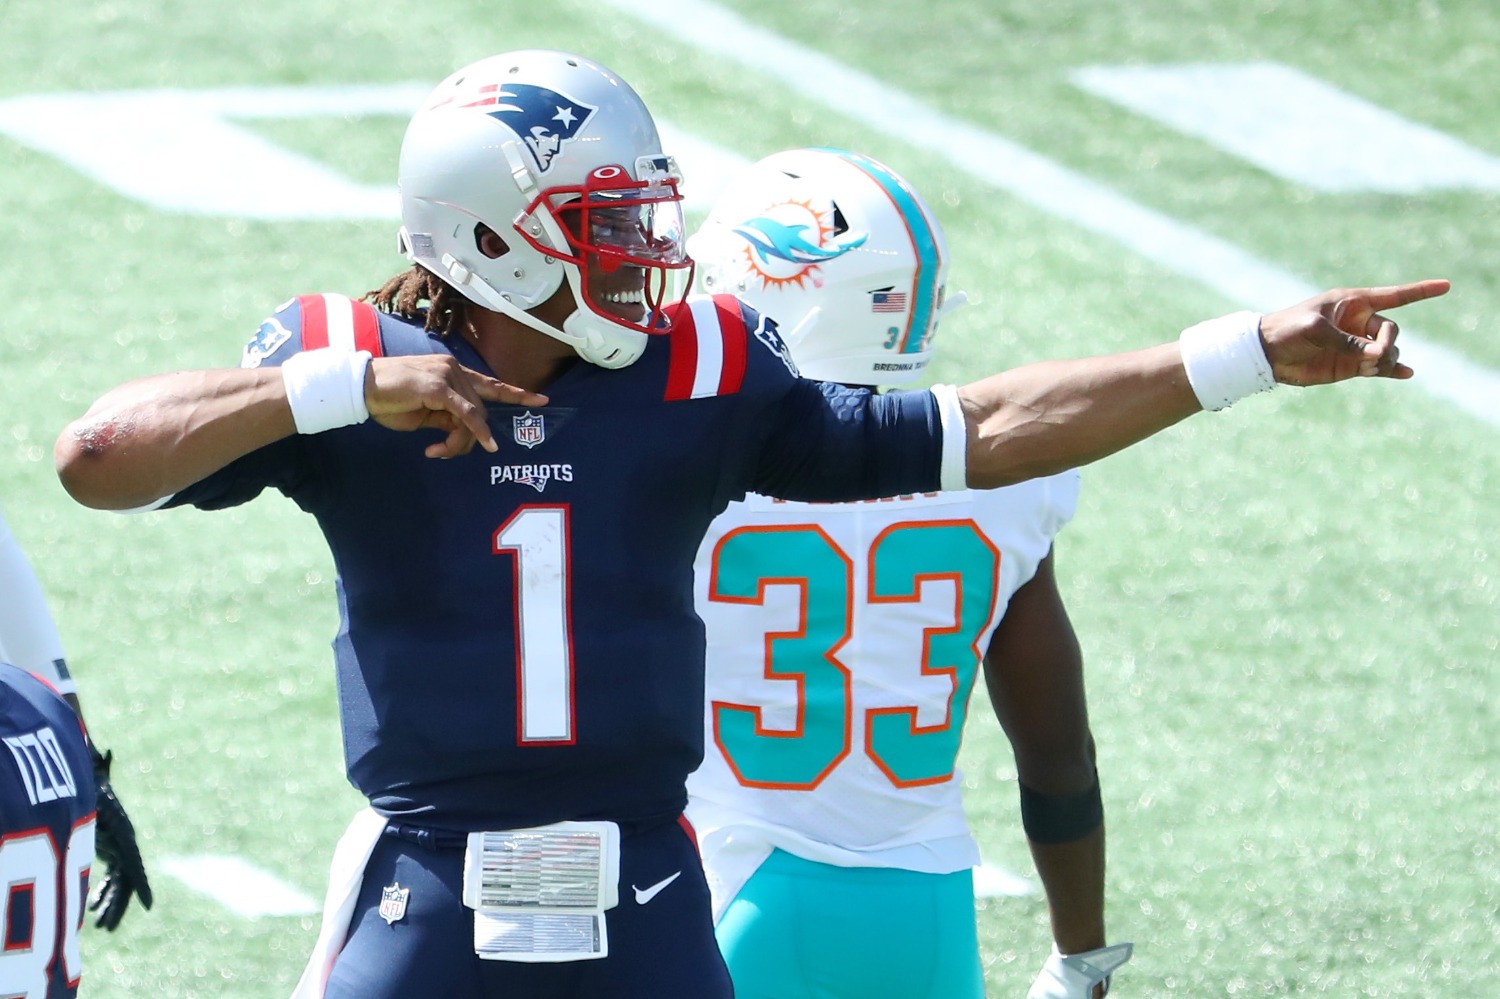 The New England Patriots sent a terrifying message to the rest of the NFL that their dynasty is far from over as long as Cam Newton stays healthy.